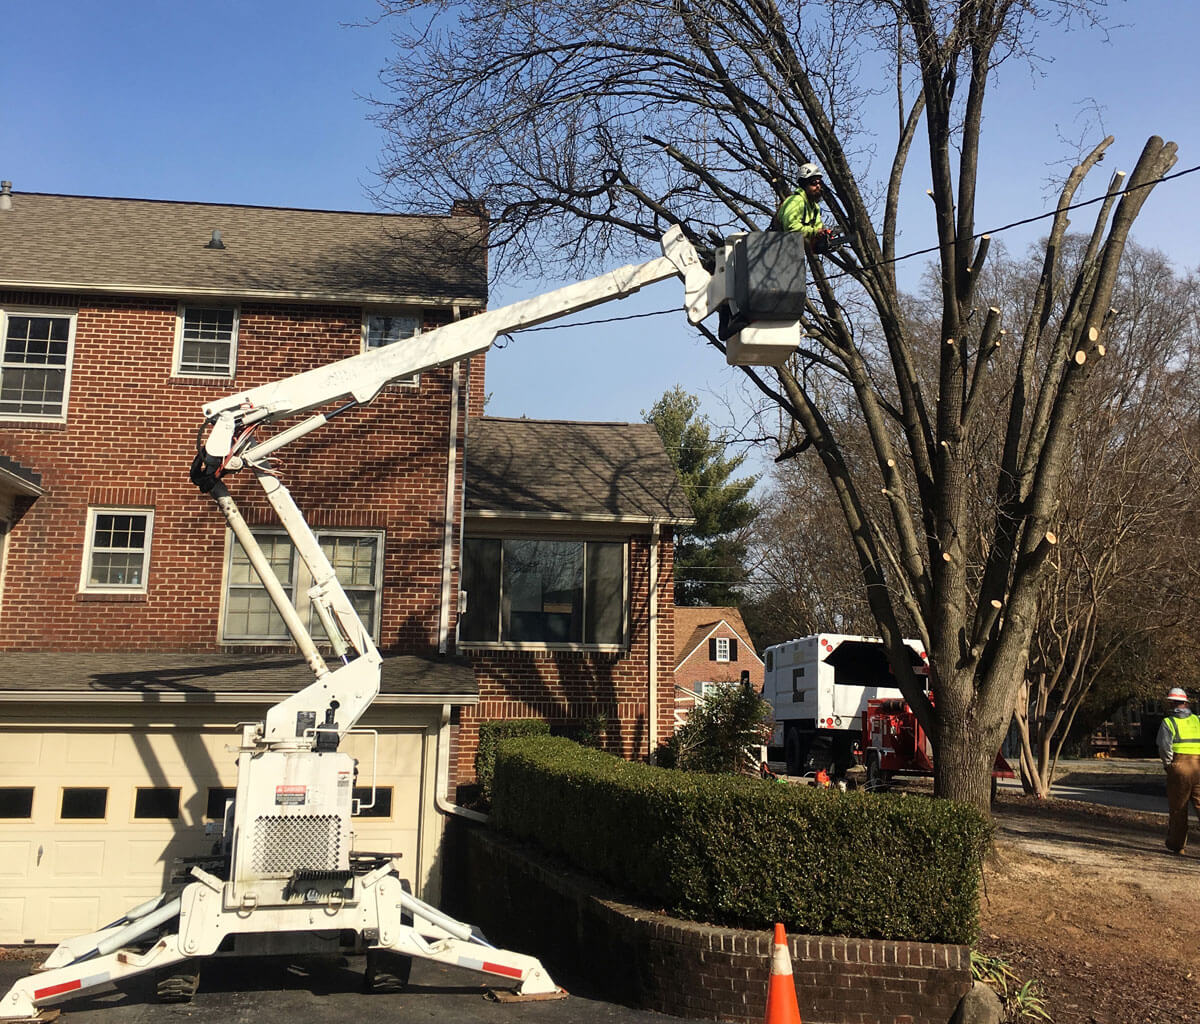 Residential Tree Services-Riviera Beach Tree Trimming and Tree Removal Services-We Offer Tree Trimming Services, Tree Removal, Tree Pruning, Tree Cutting, Residential and Commercial Tree Trimming Services, Storm Damage, Emergency Tree Removal, Land Clearing, Tree Companies, Tree Care Service, Stump Grinding, and we're the Best Tree Trimming Company Near You Guaranteed!